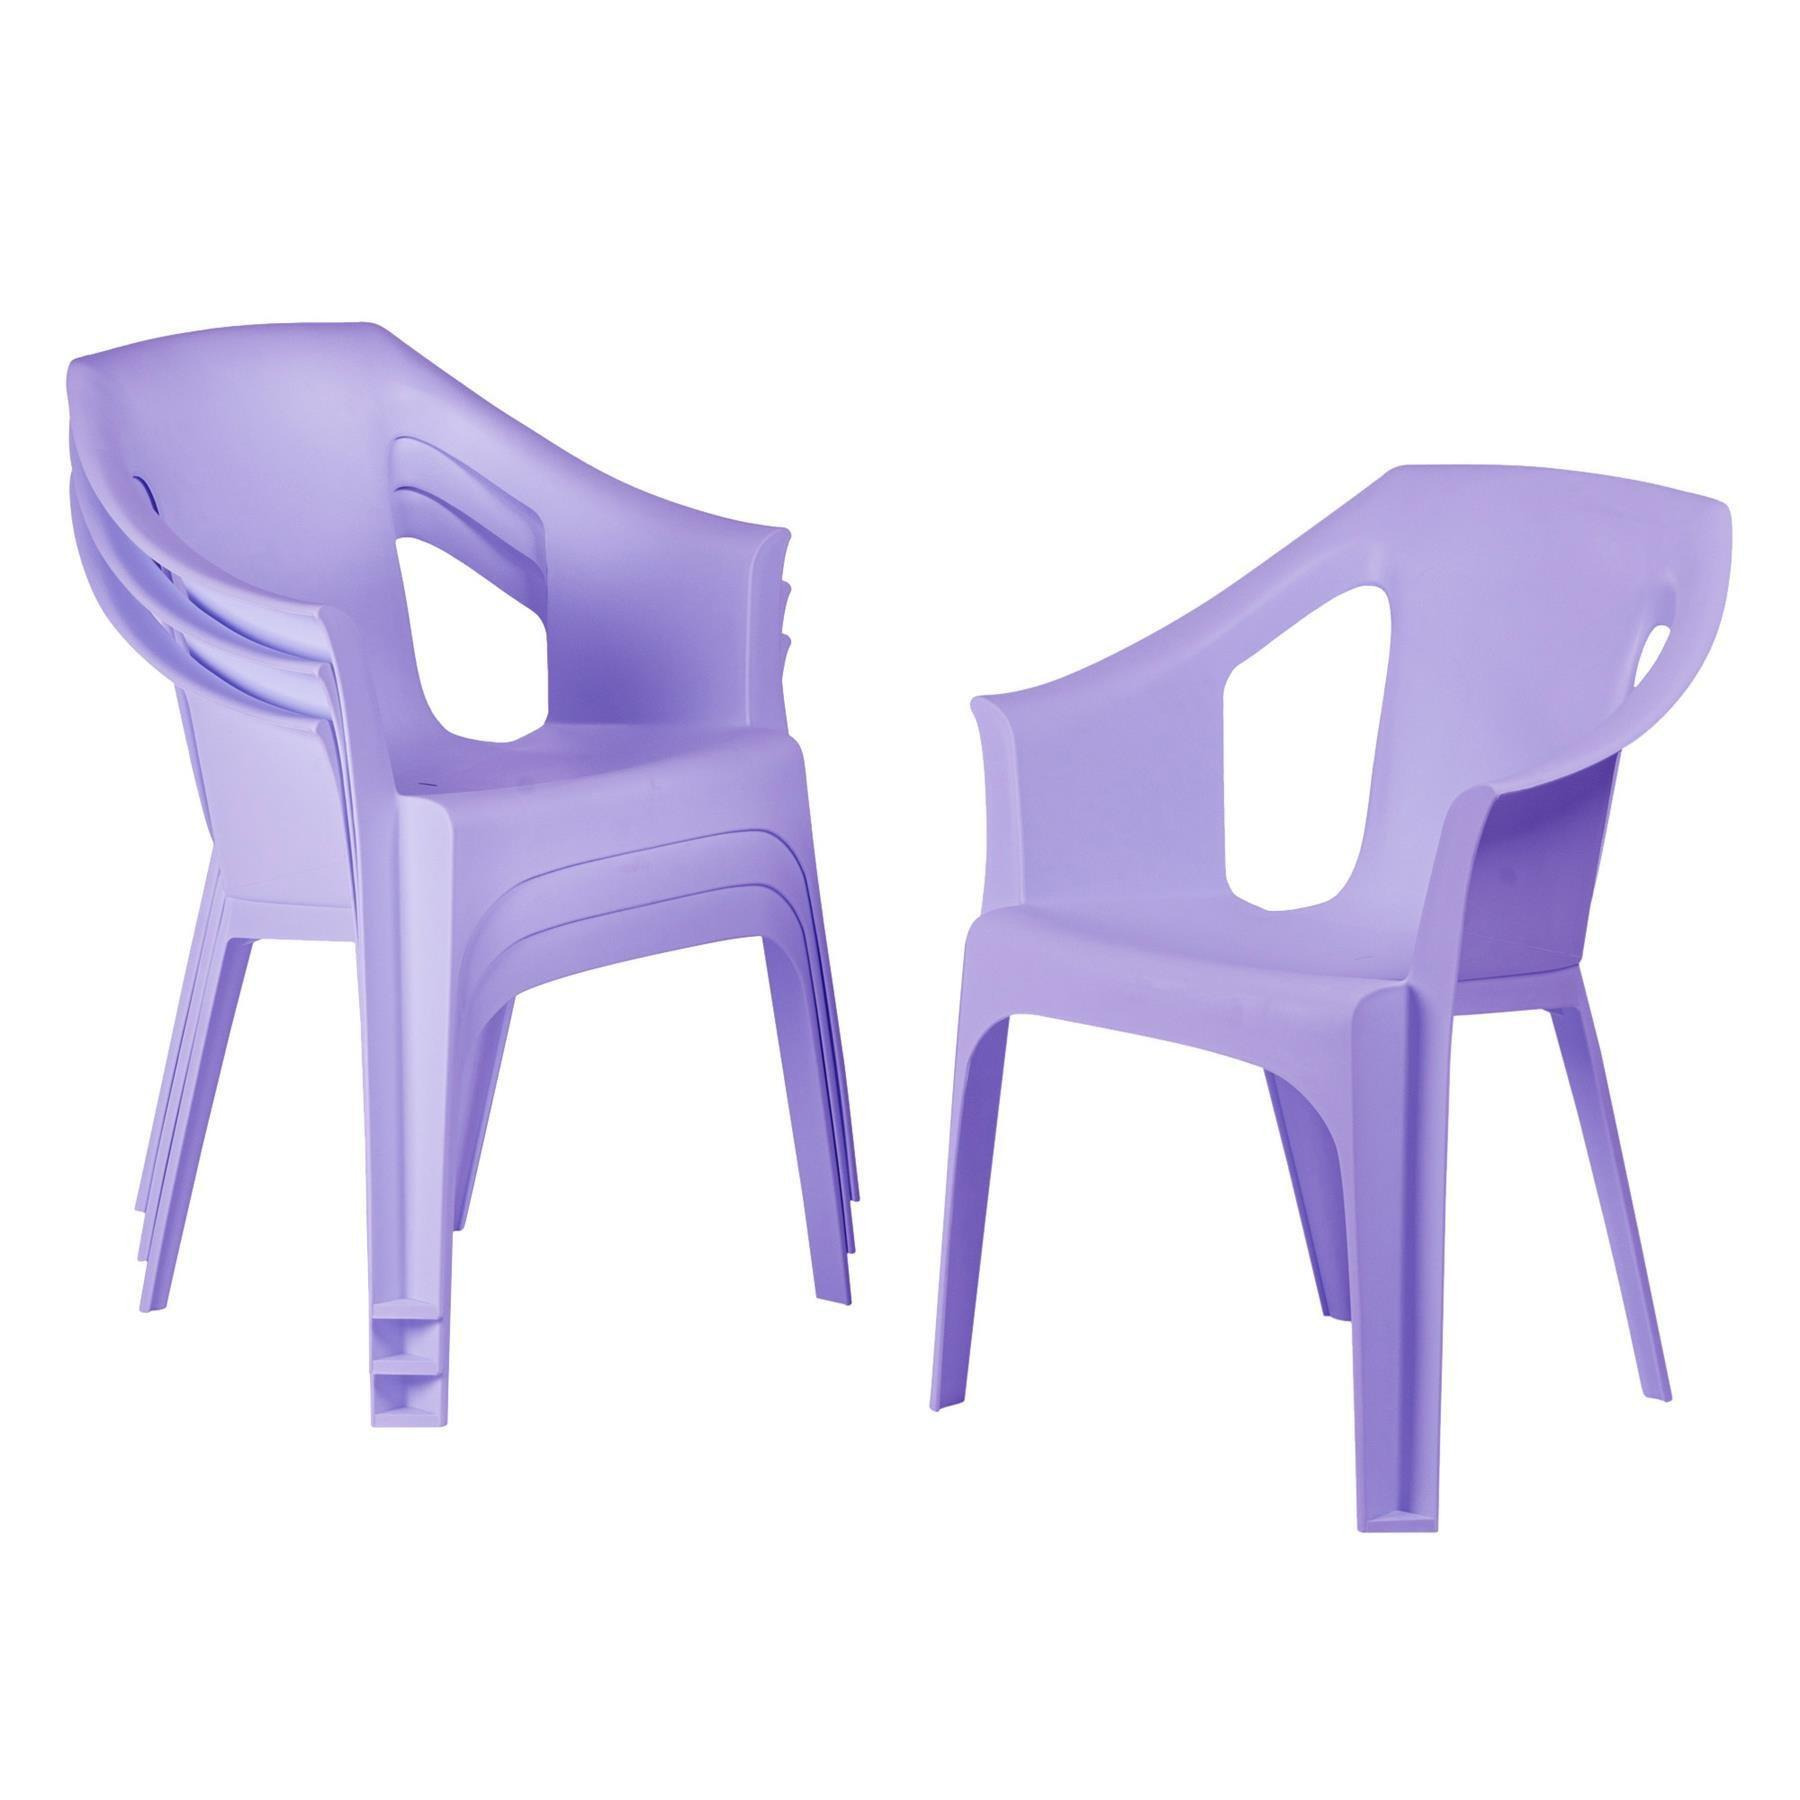 Cool Garden Dining Chairs Pack of 4 - image 1